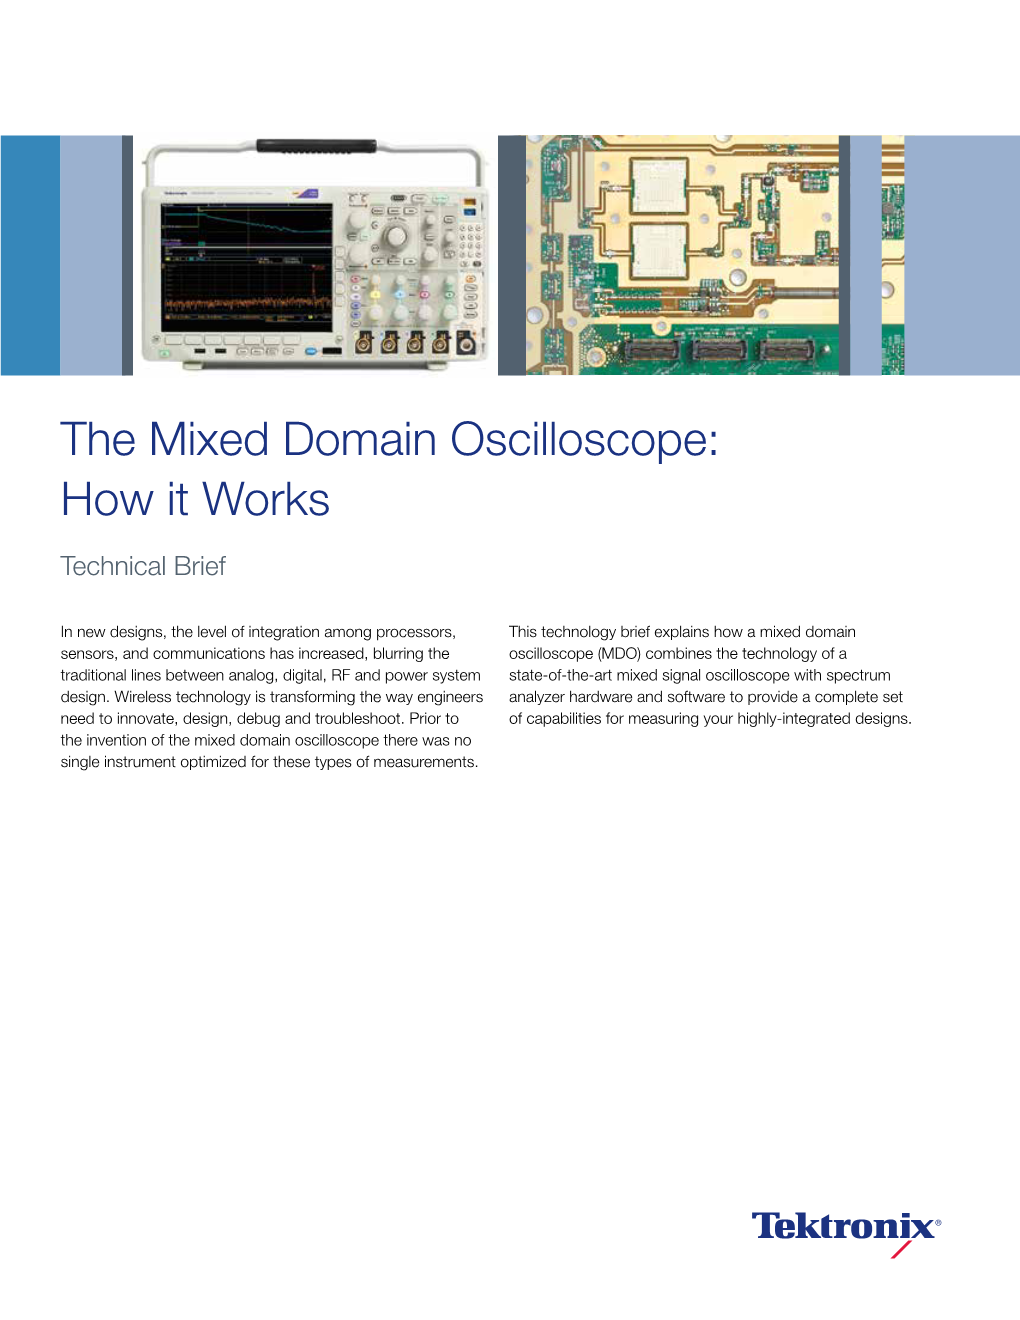 The Mixed Domain Oscilloscope: How It Works